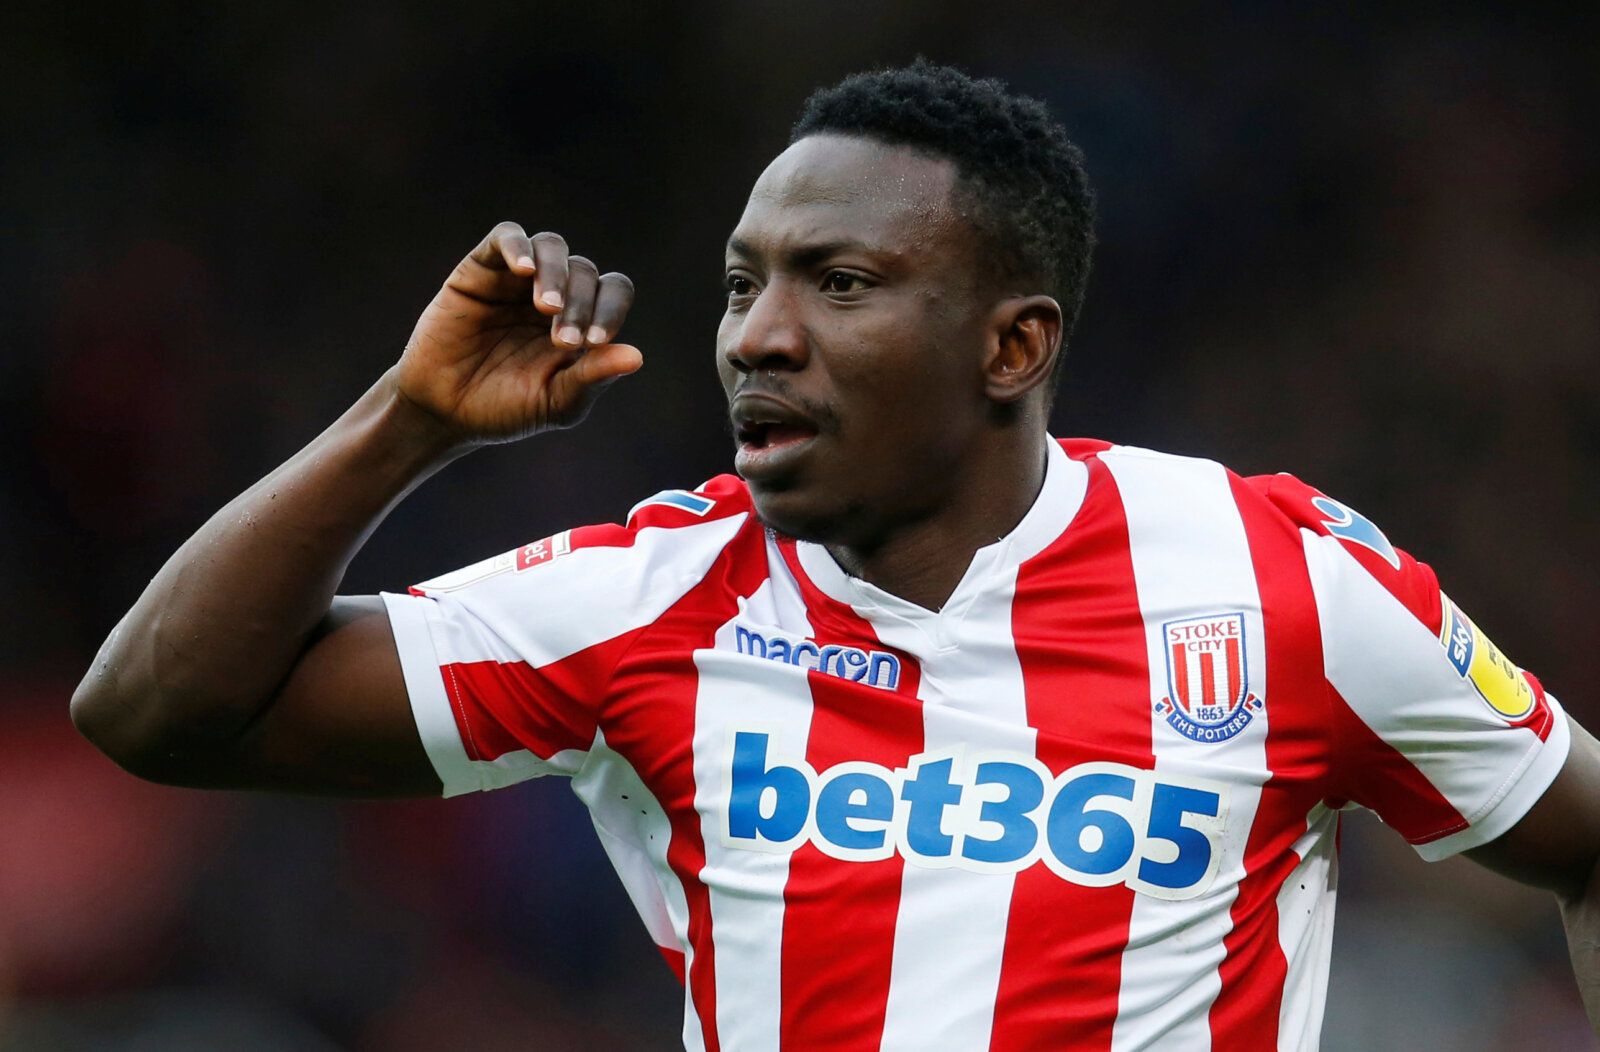 Soccer Football - Championship - Stoke City v Nottingham Forest - bet365 Stadium, Stoke-on-Trent, Britain - March 2, 2019  Stoke City's Peter Etebo celebrates scoring their first goal  Action Images/Ed Sykes  EDITORIAL USE ONLY. No use with unauthorized audio, video, data, fixture lists, club/league logos or 